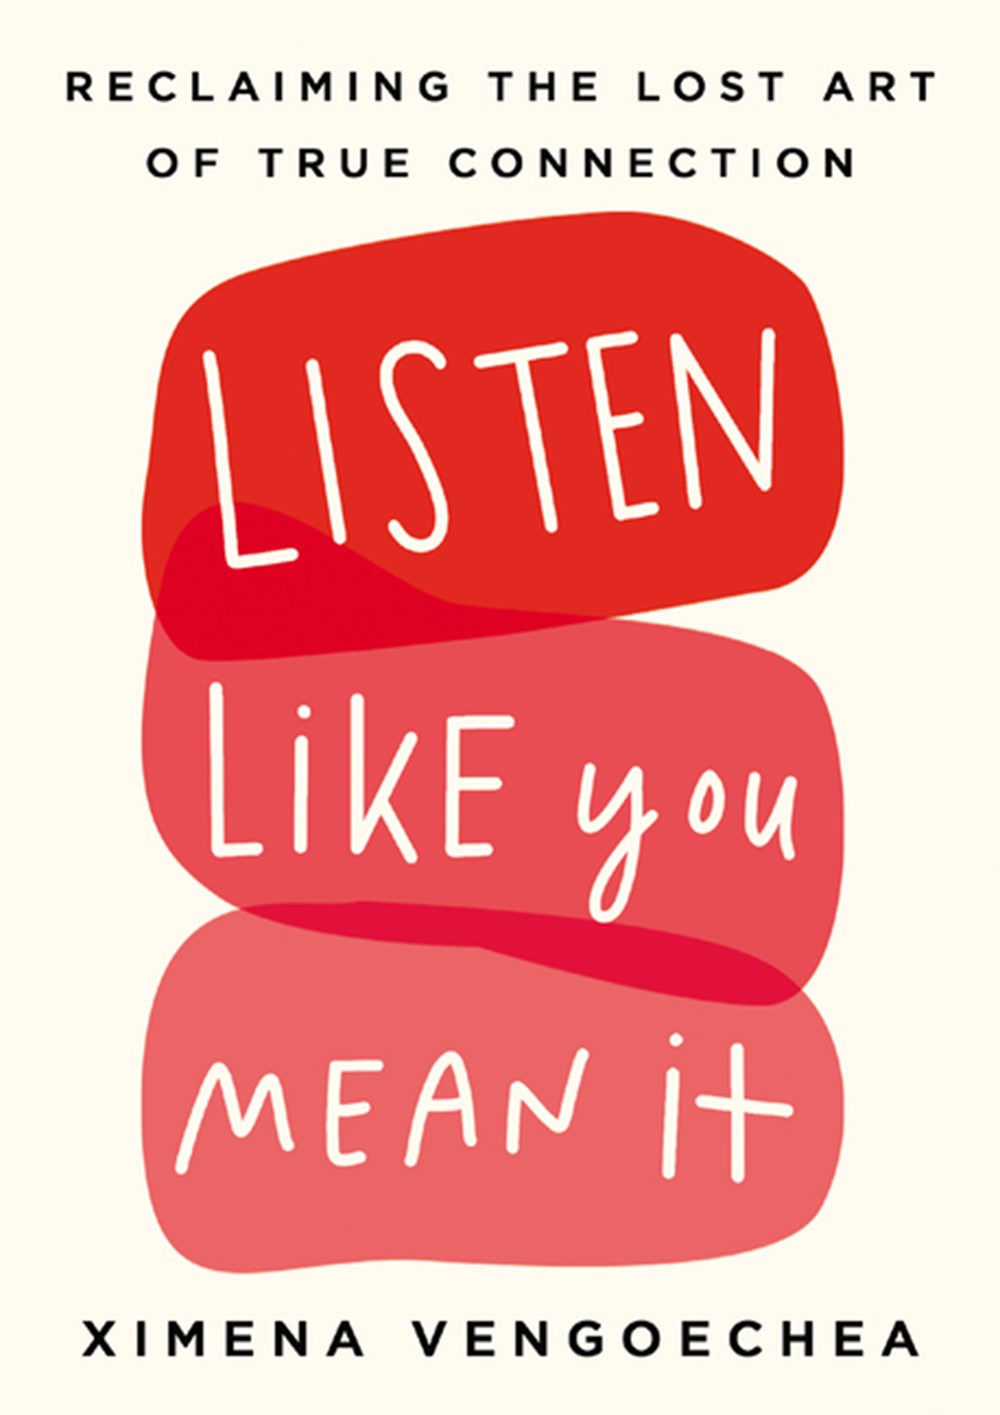 Listen Like You Mean It Reclaiming the Lost Art of True Connection